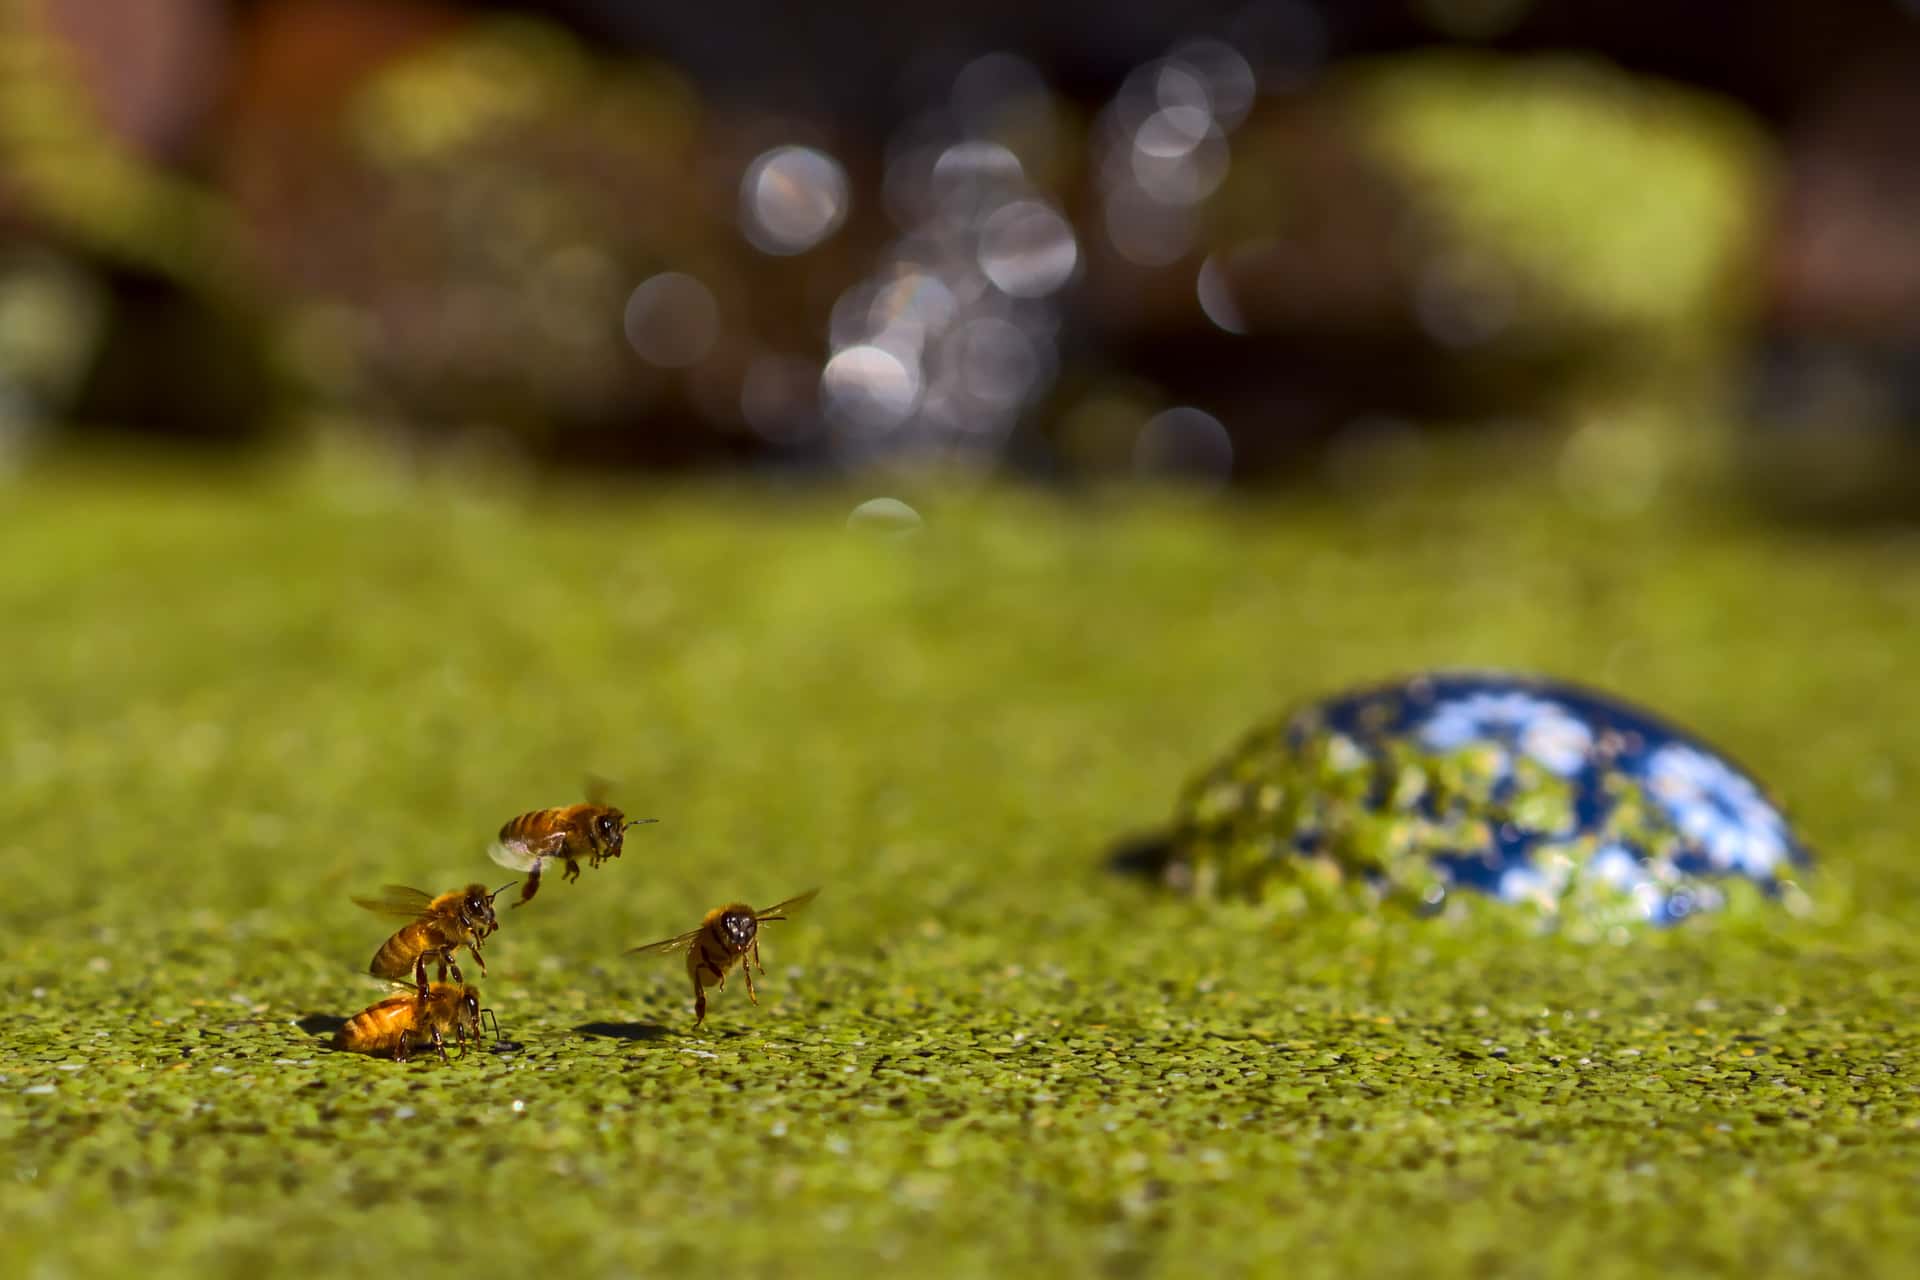 temporal composite of a honey bee hopping on duckweed